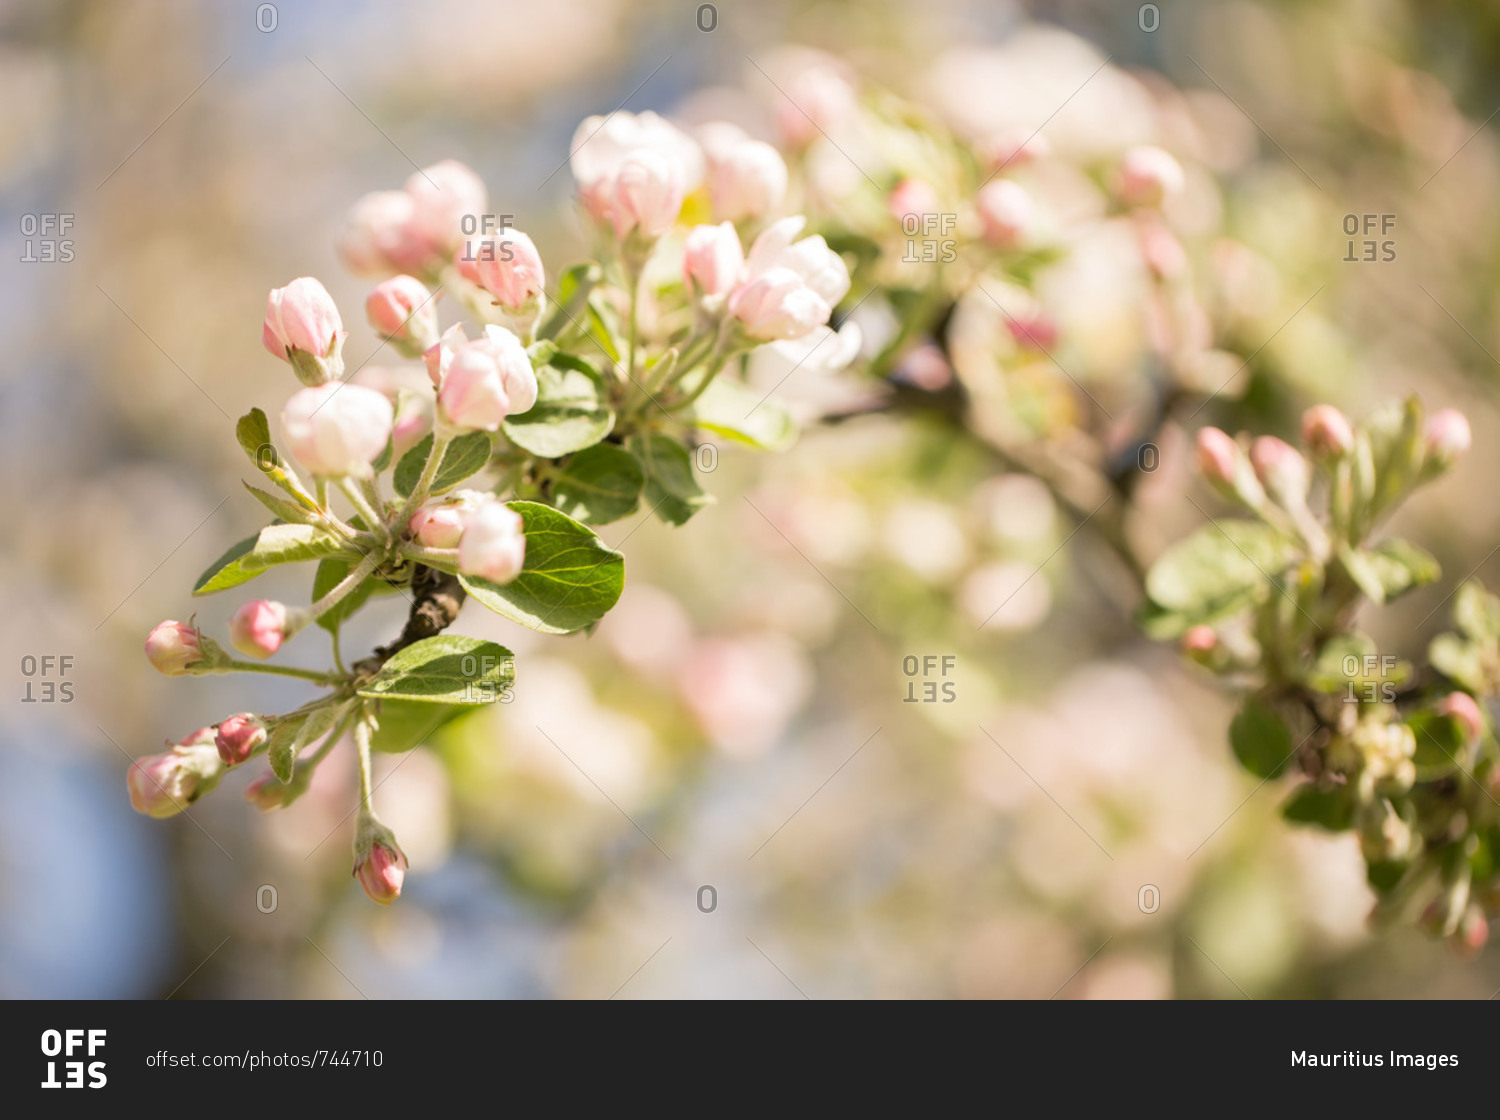 Apple Tree branch with white flowers and pink flower buds